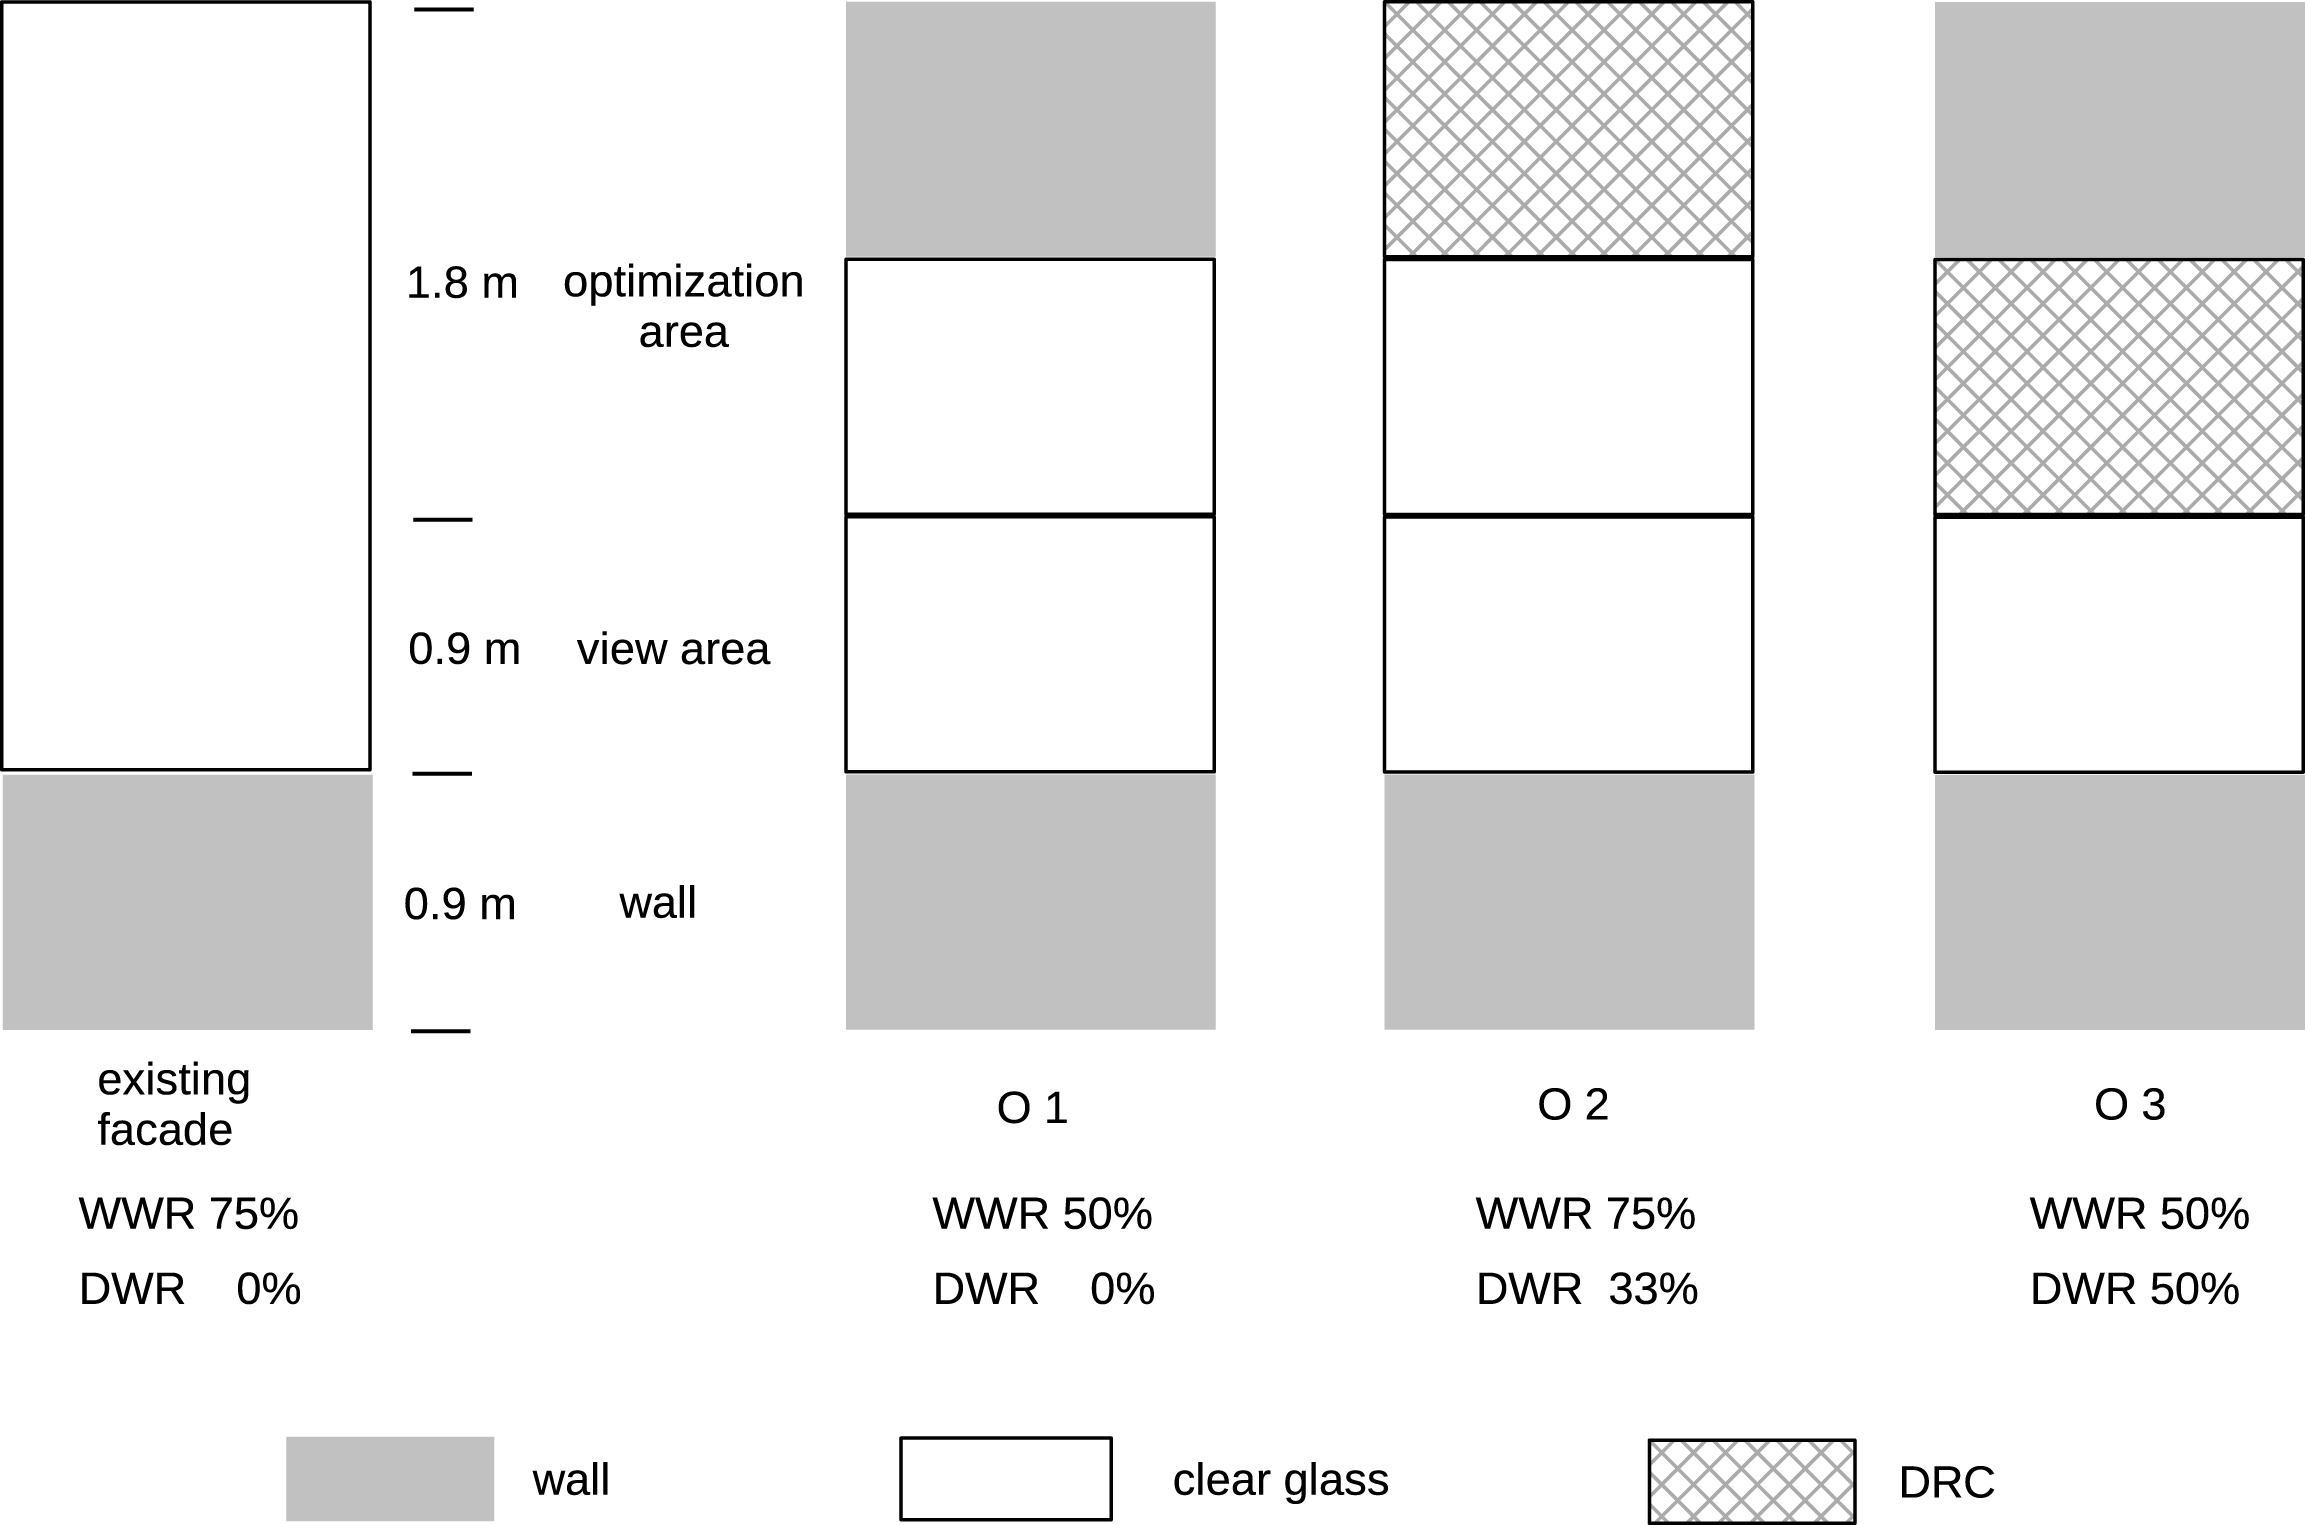 Partitioning of the vertical window segments of the facade in the abstract model used for the simulation. The existing facade is shown on the left, on the right the three optimization variants and their different set-ups with a combination of either wall and clear glazing (O1), DRC and clear glazing (O2) or wall and DRC sections (O3) are depicted.